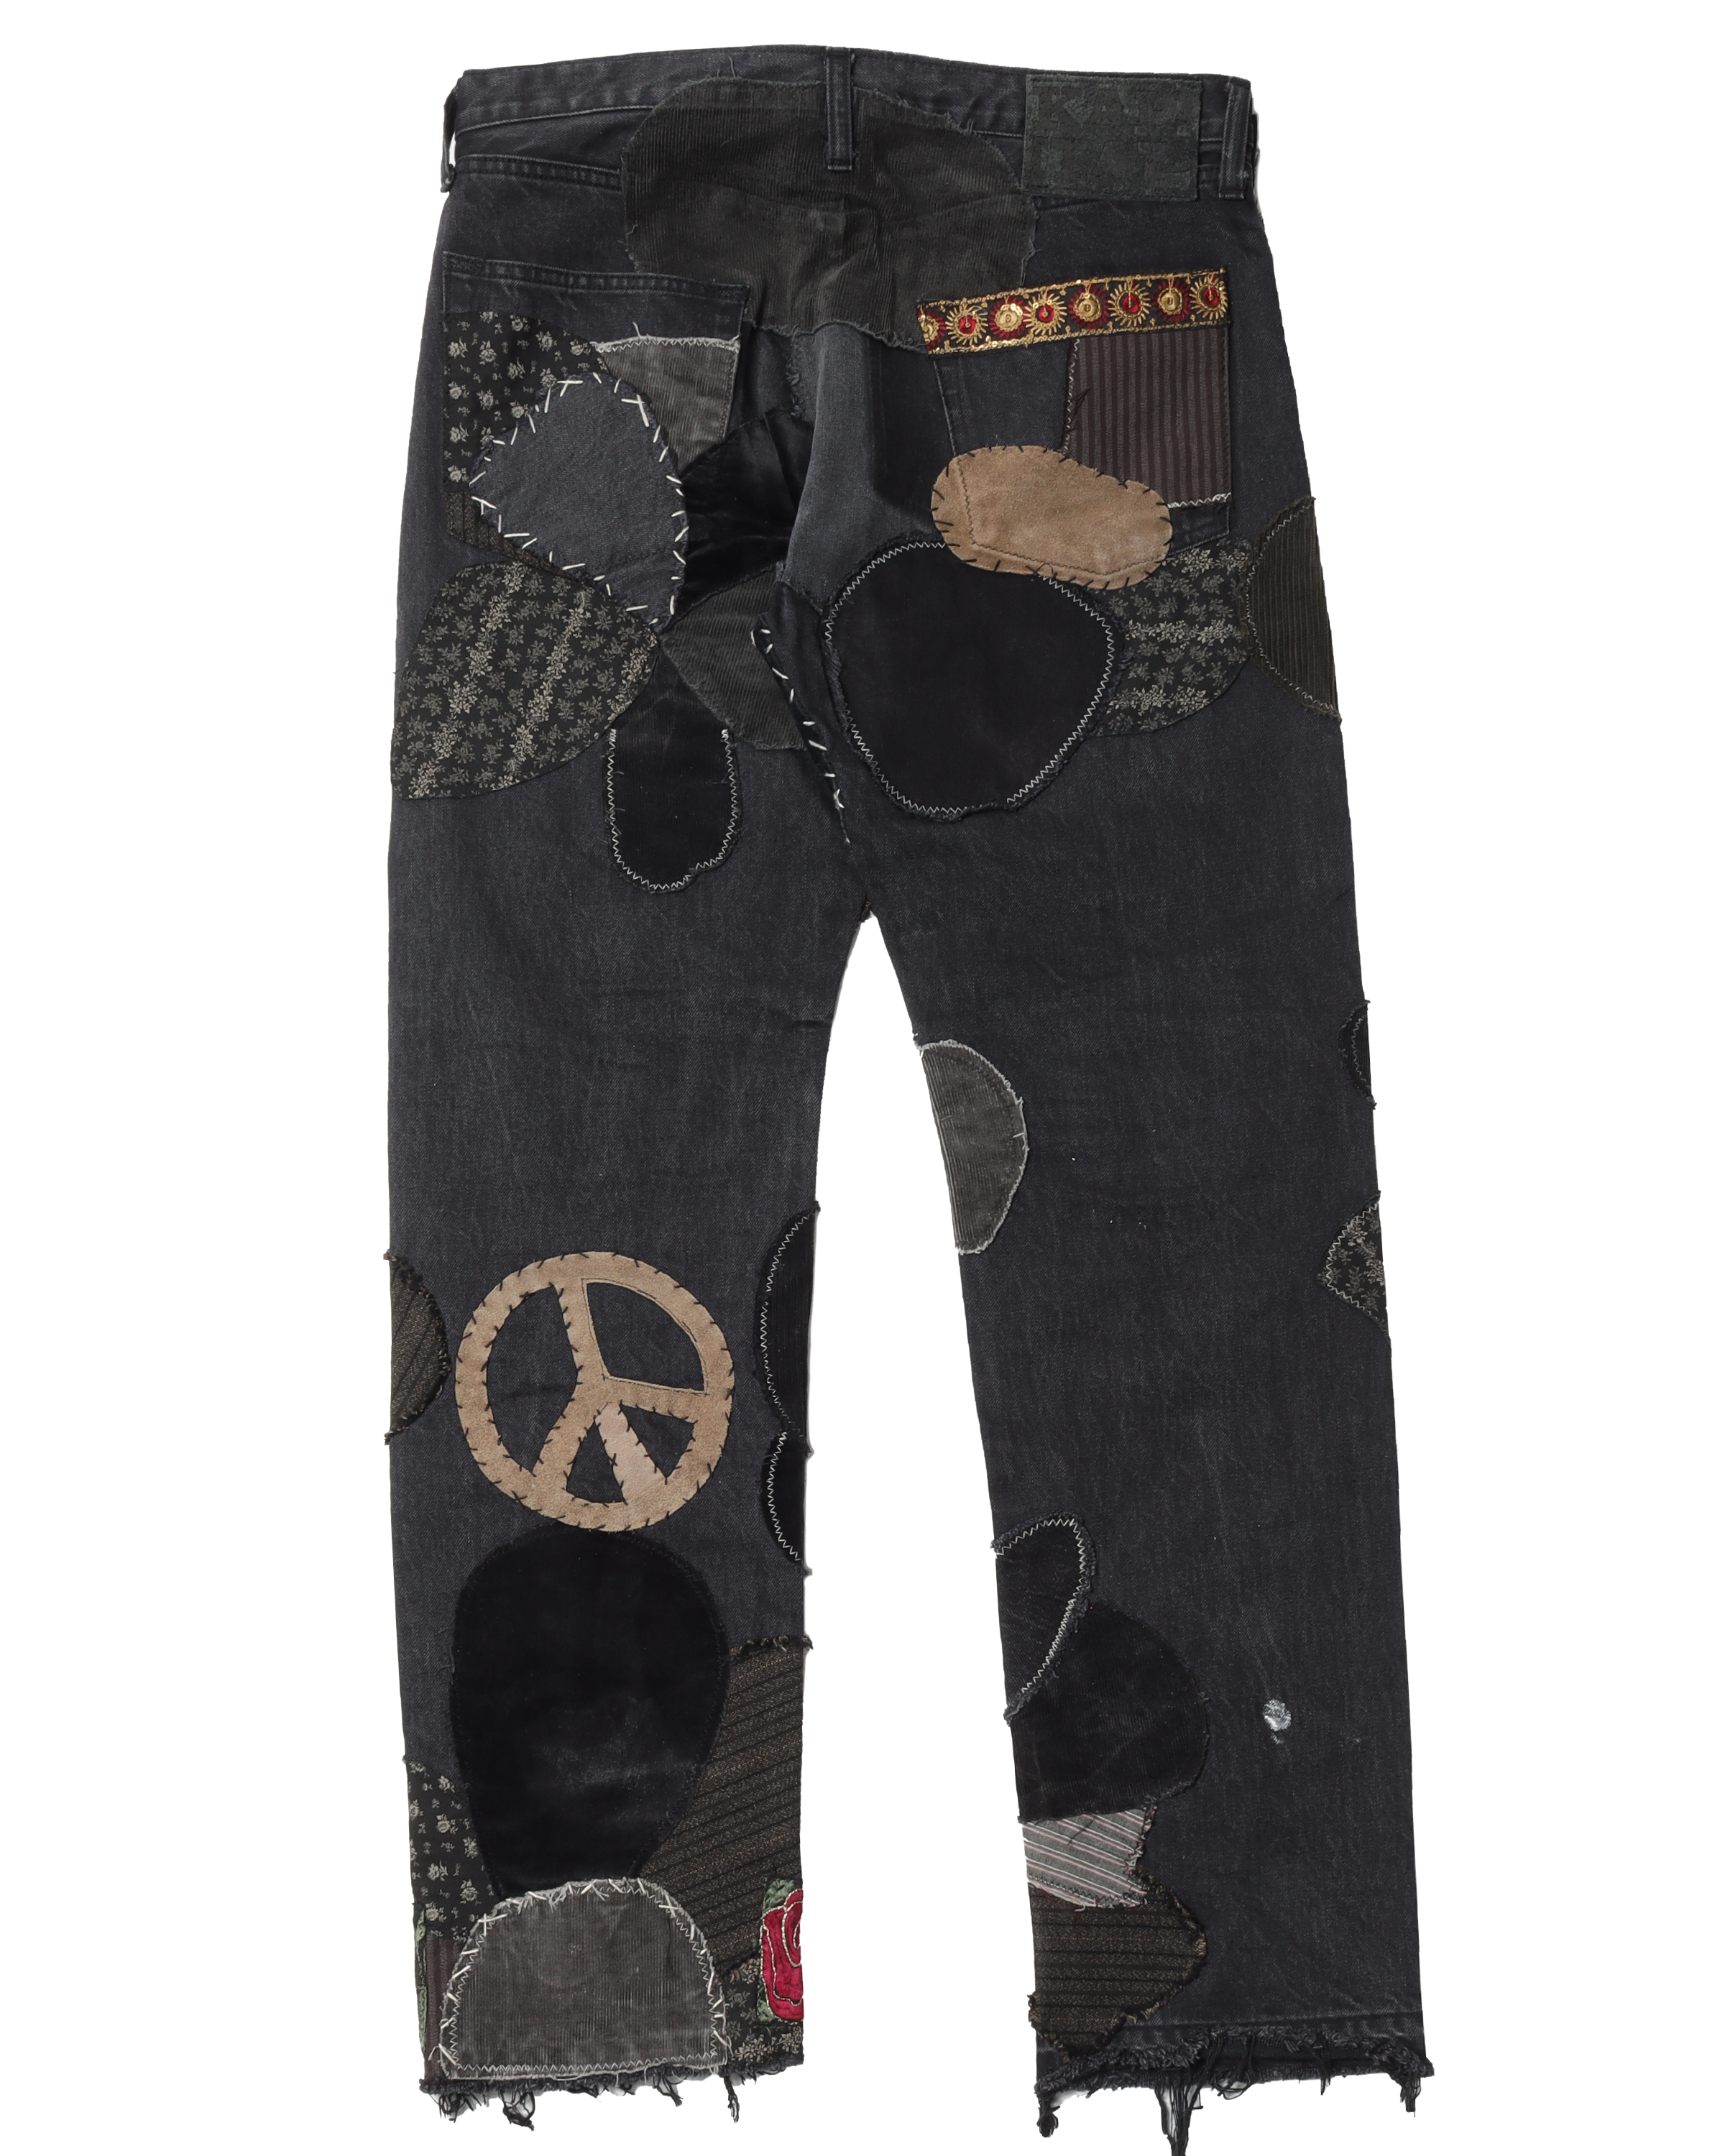 Black Patched Jeans